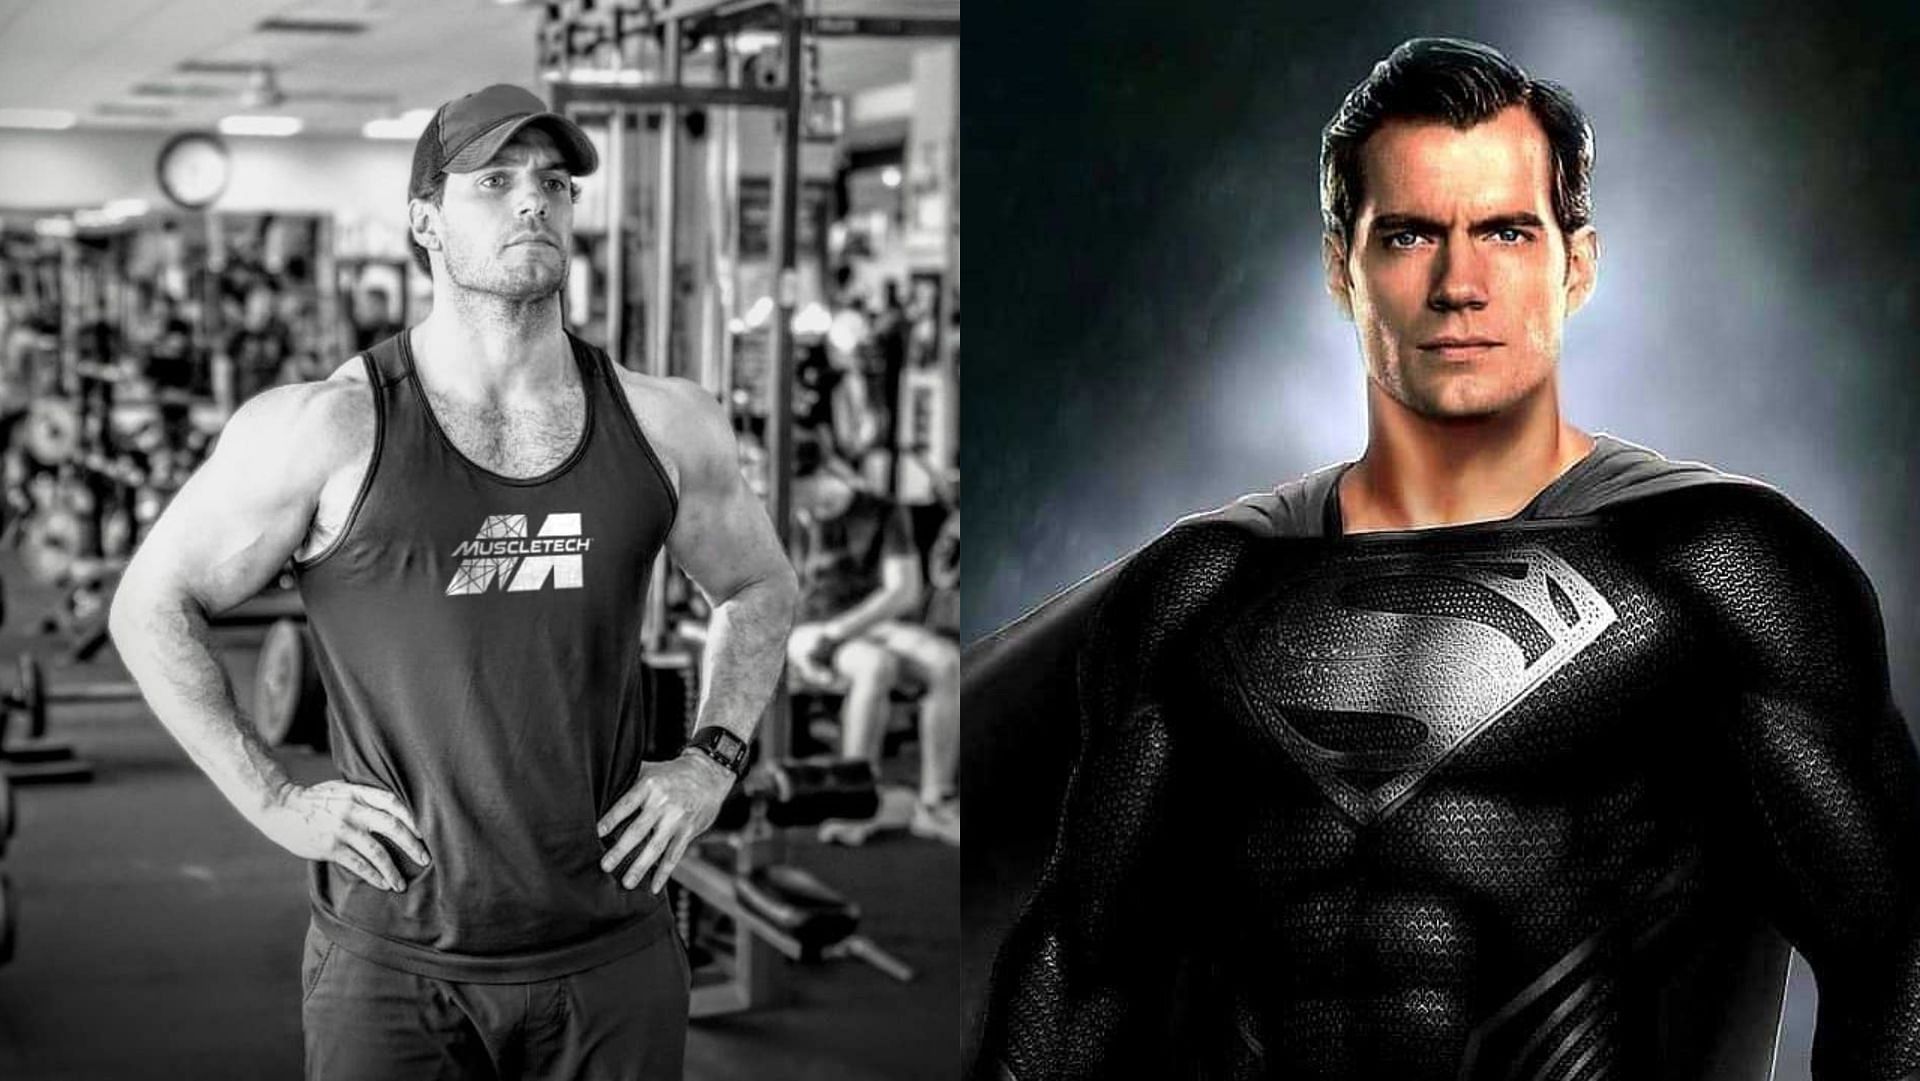 The British actor showed off his ripped body in Man of Steel and Batman v Superman (Image via Instagram)